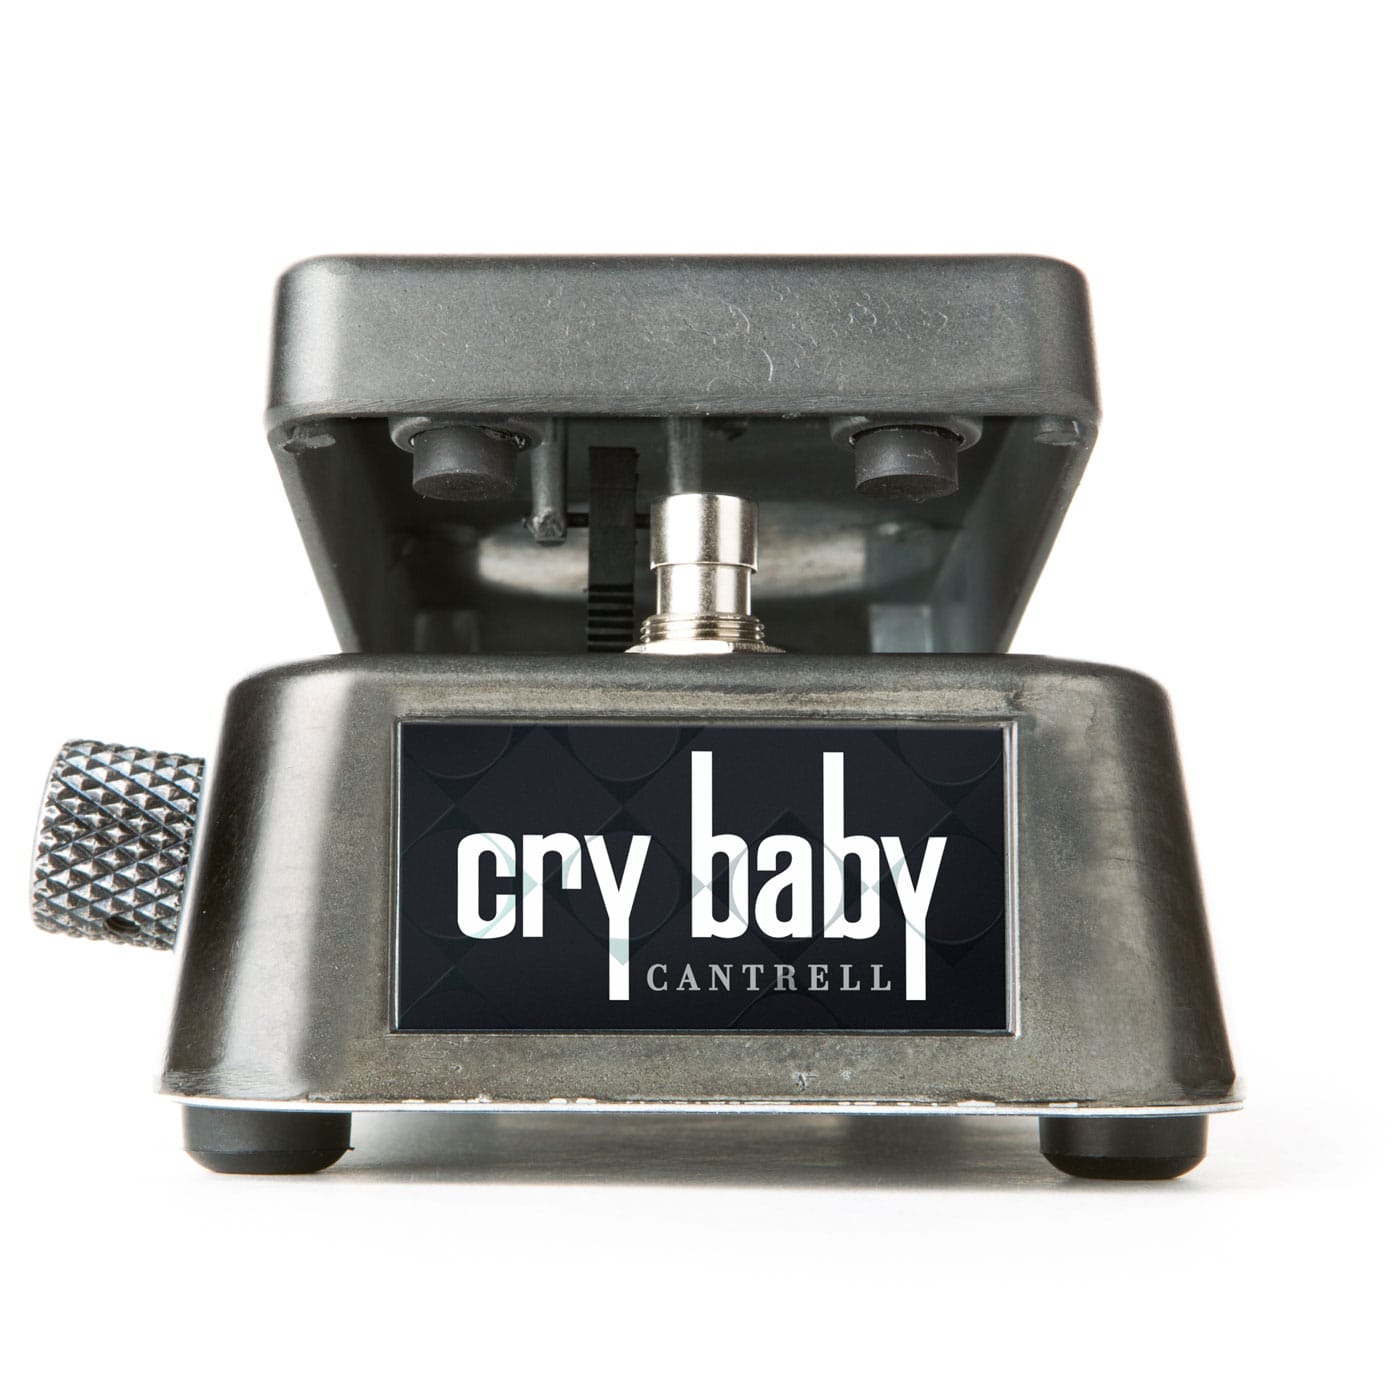 JIM DUNLOP JERRY CANTRELL CRY BABY - LIMITED EDITION BLACK